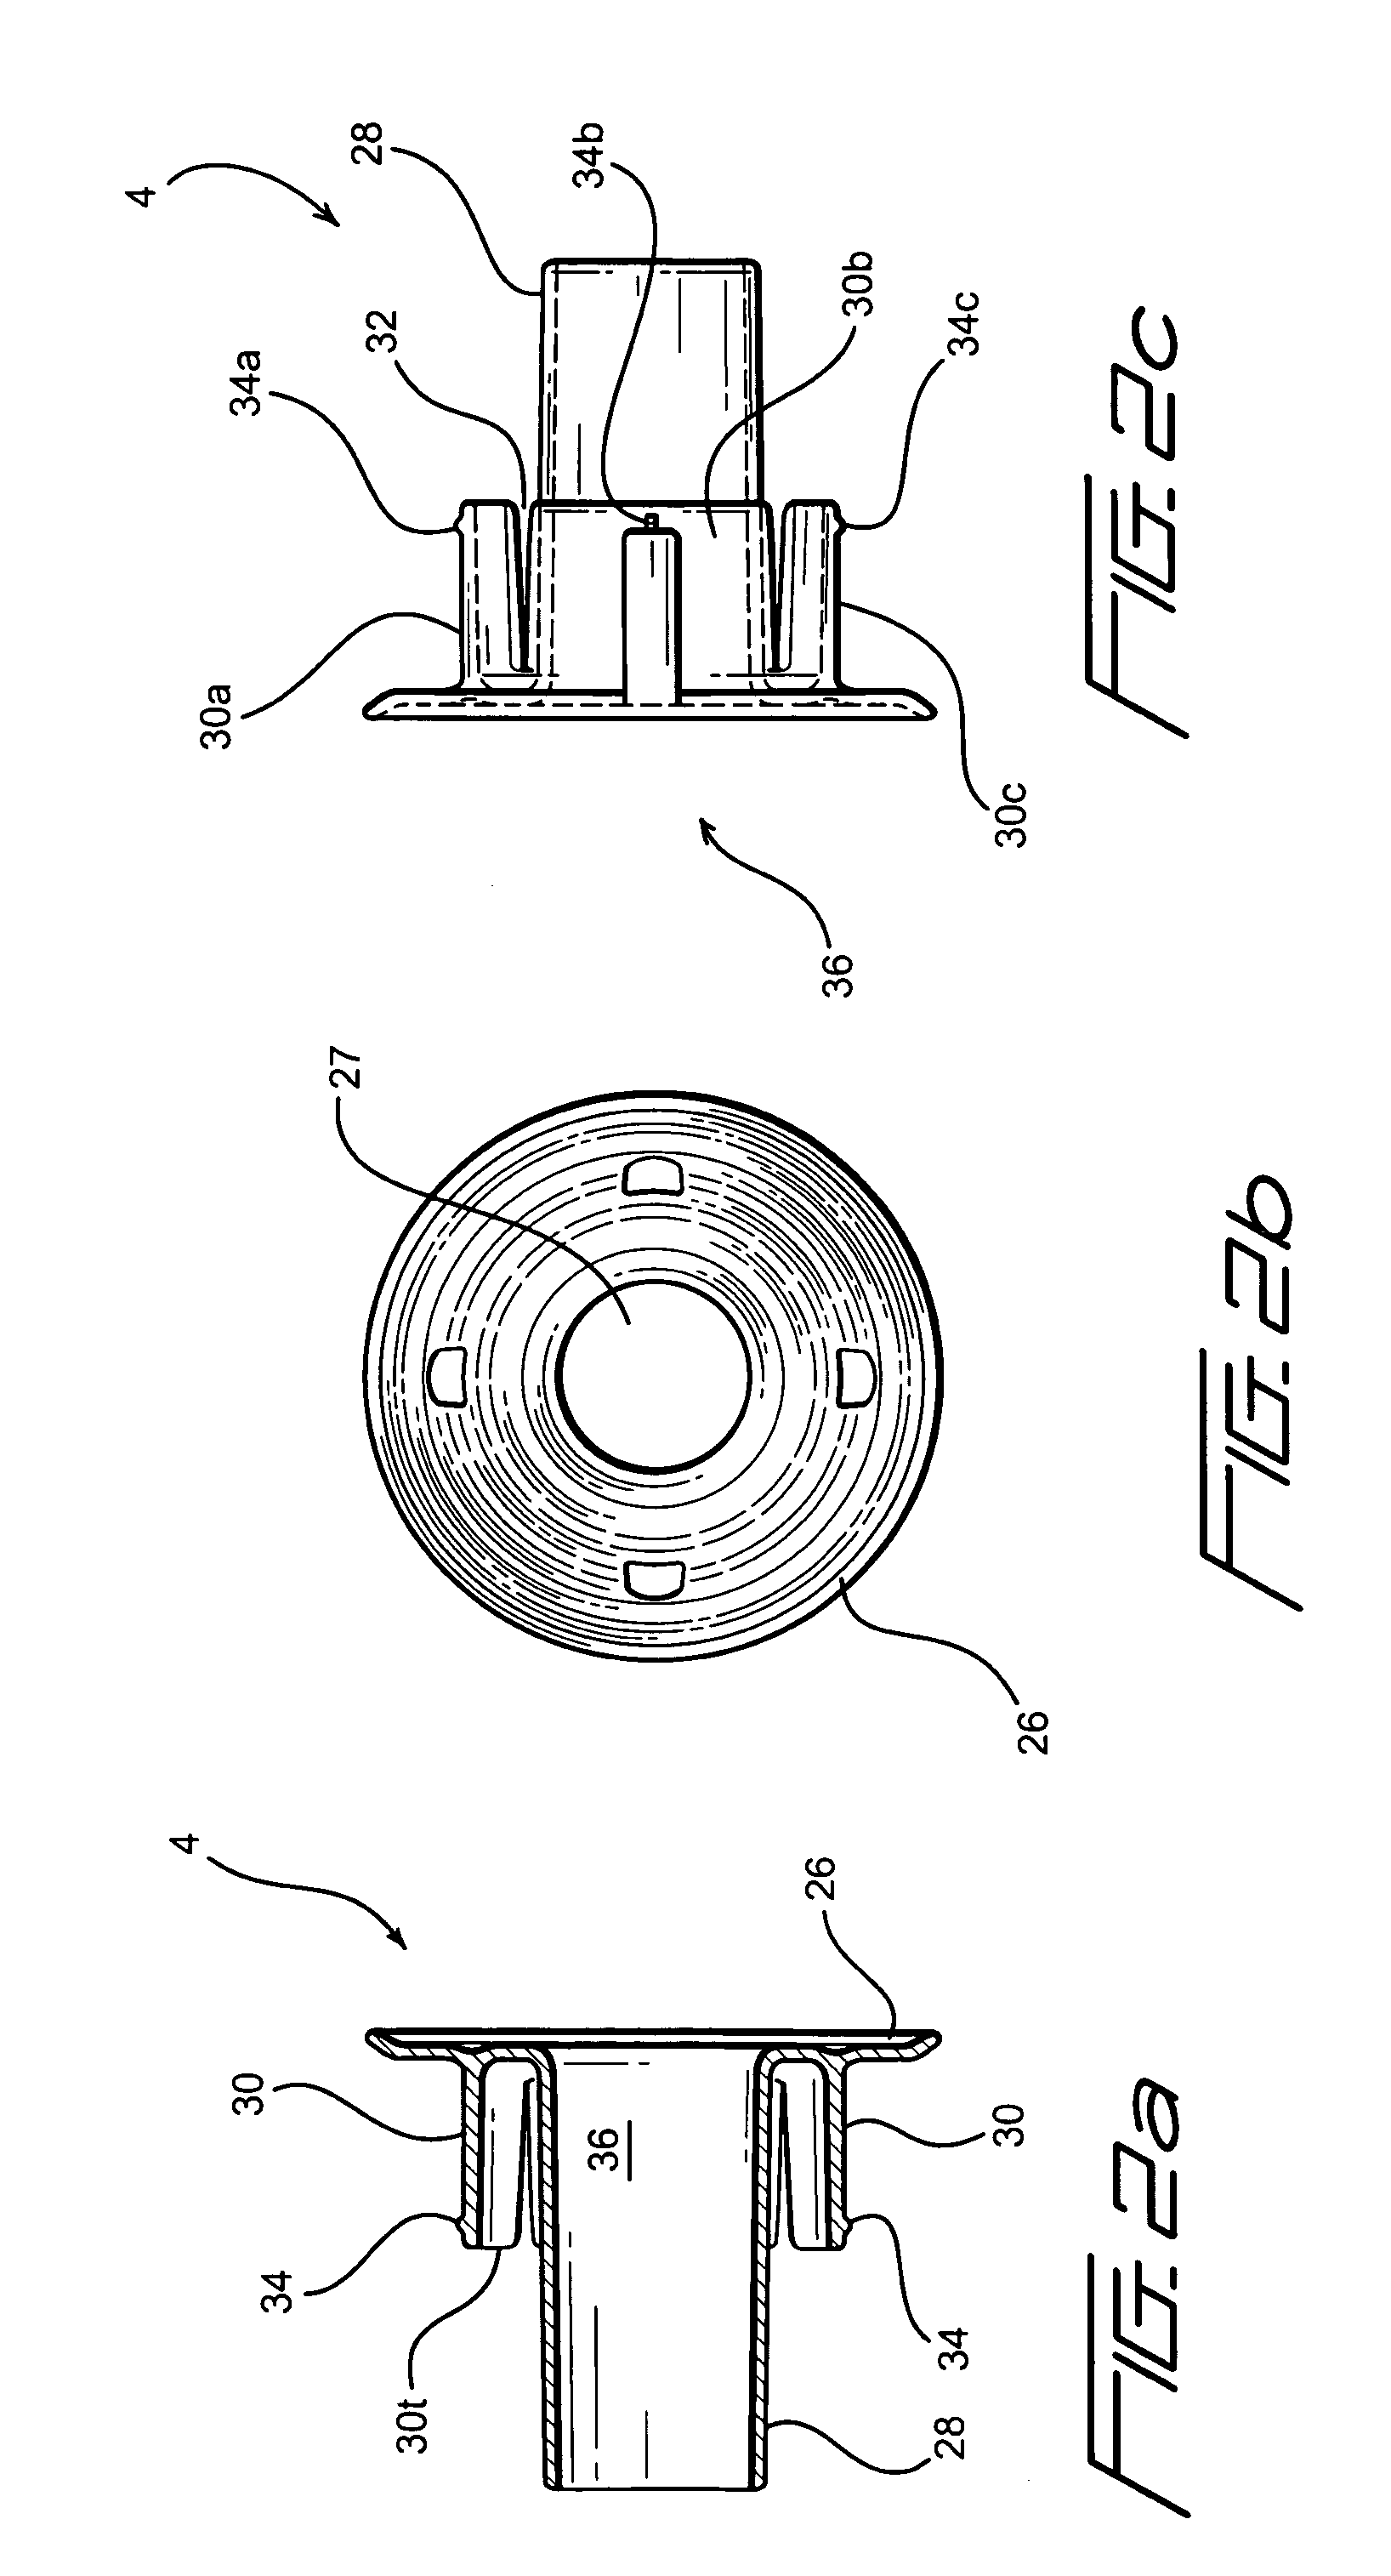 Fluid transfer holder assembly and a method of fluid transfer